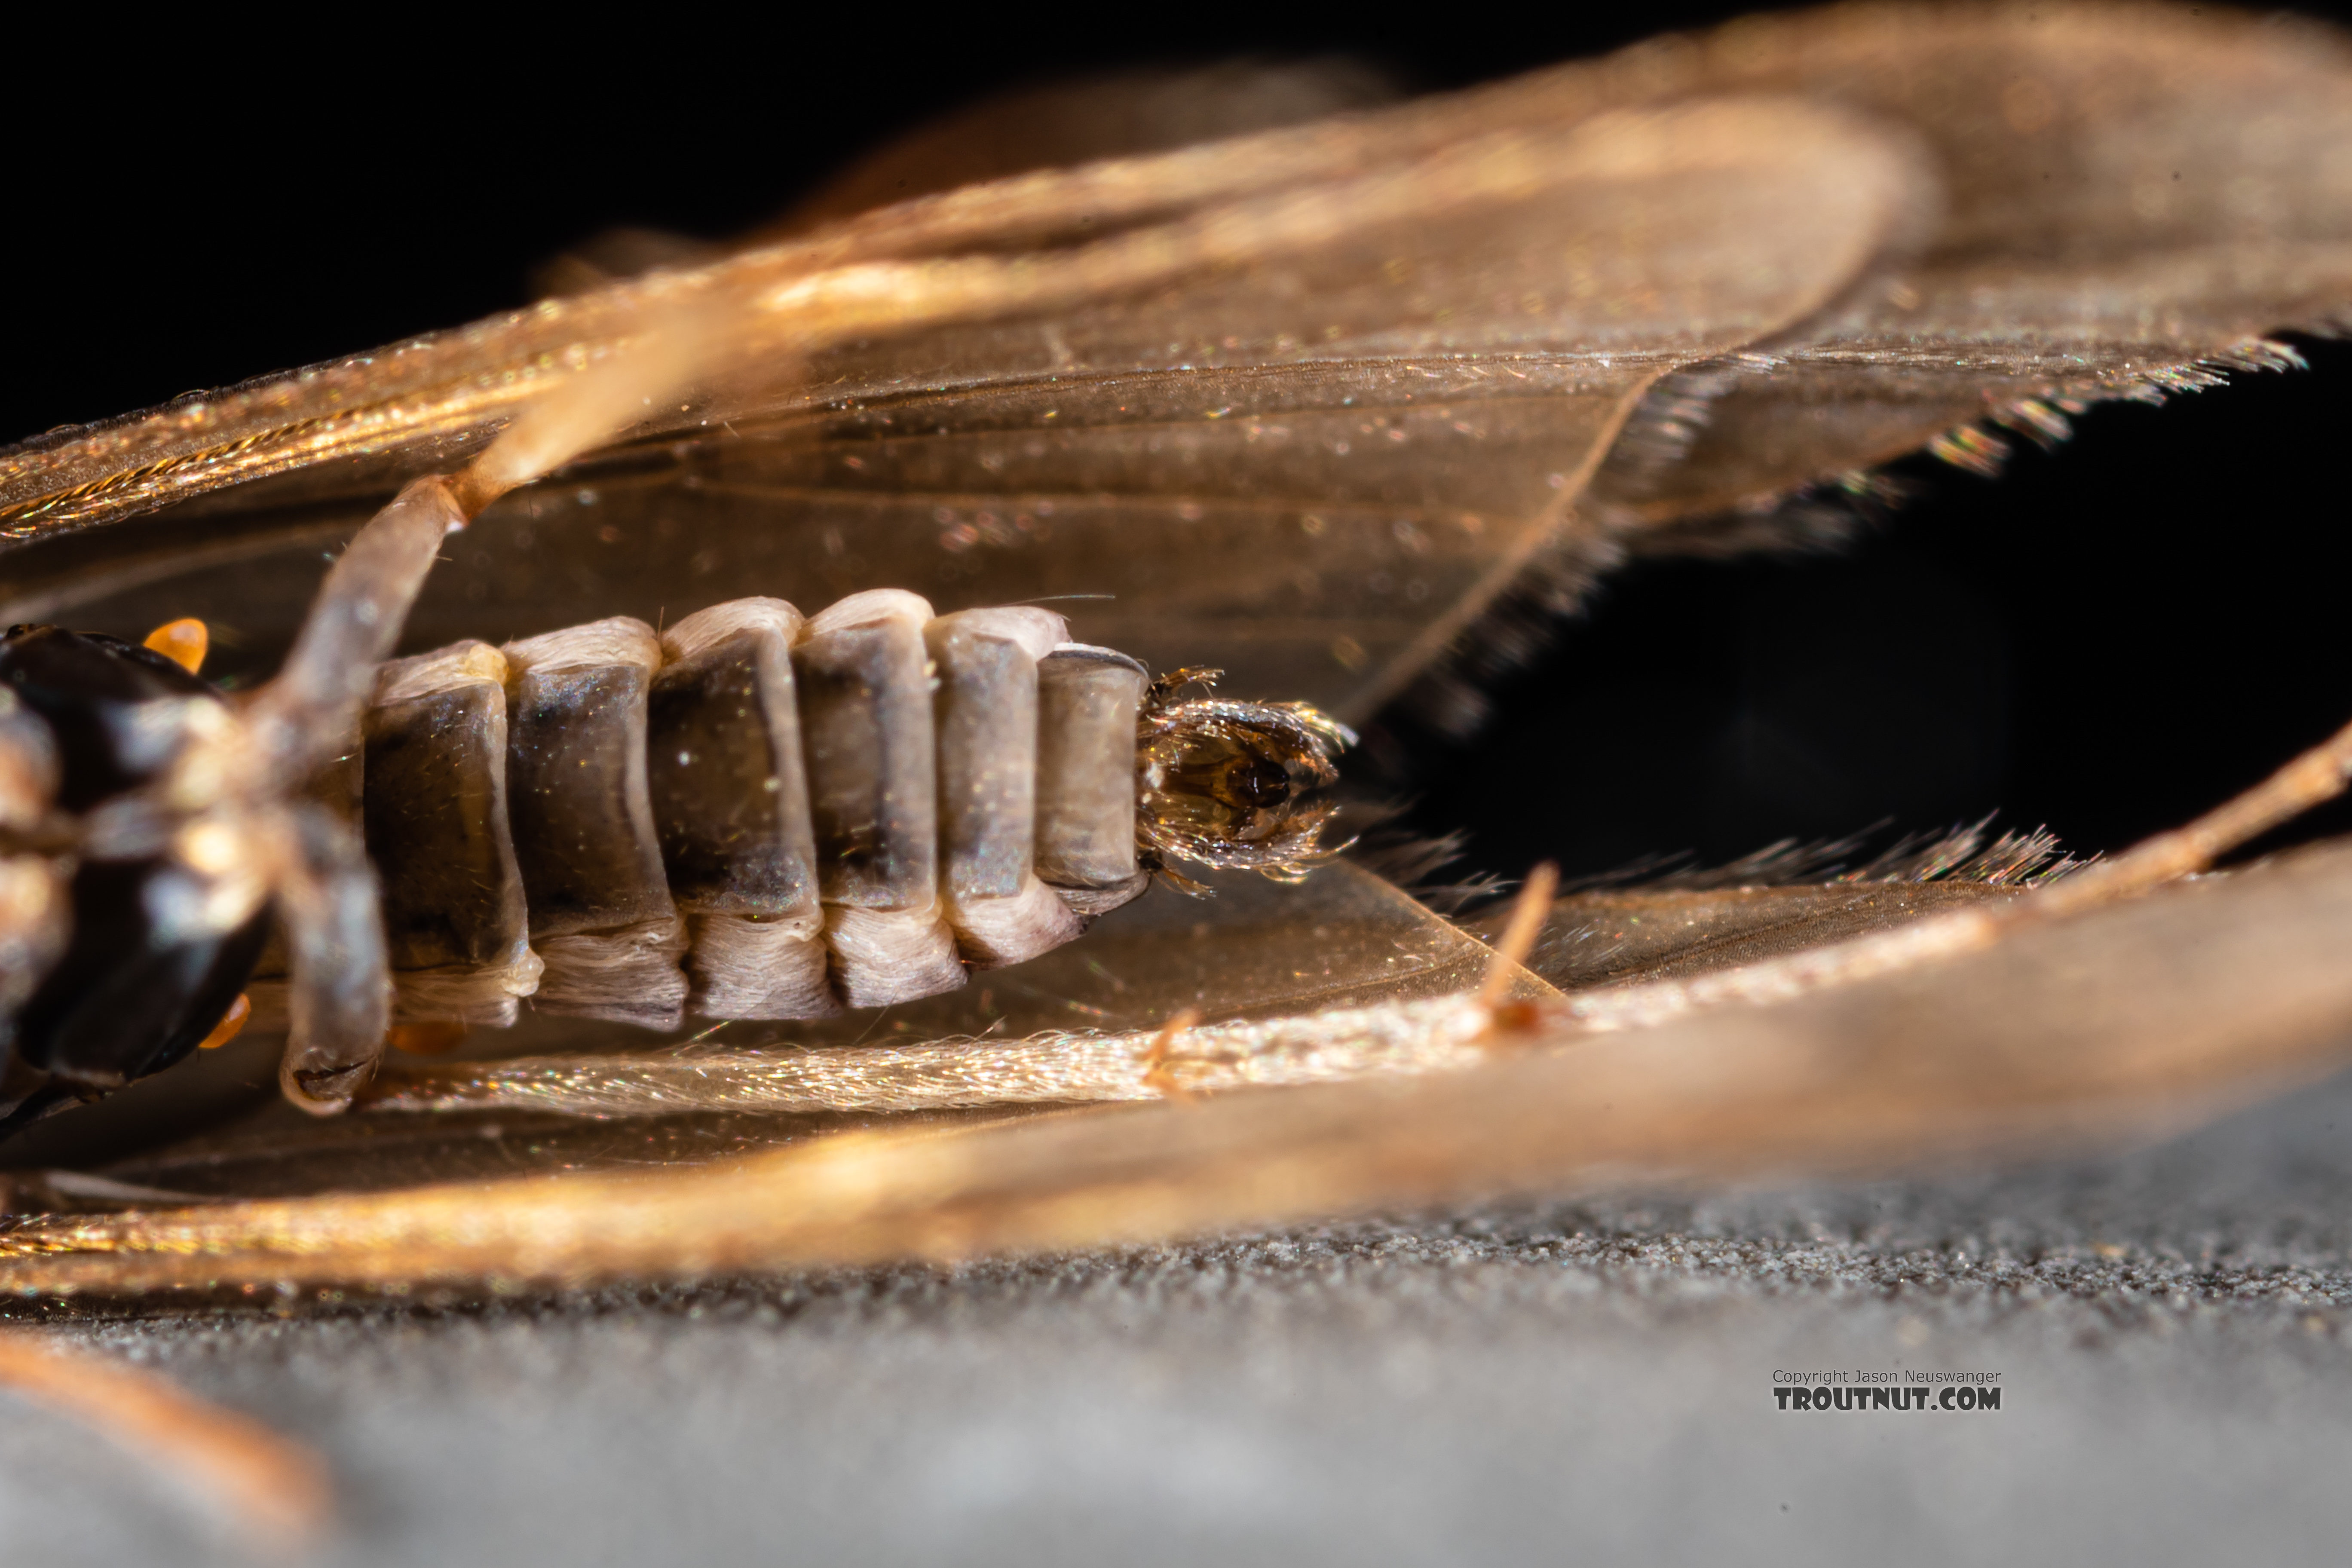 Male Cheumatopsyche (Little Sister Sedges) Caddisfly Adult from the Madison River in Montana